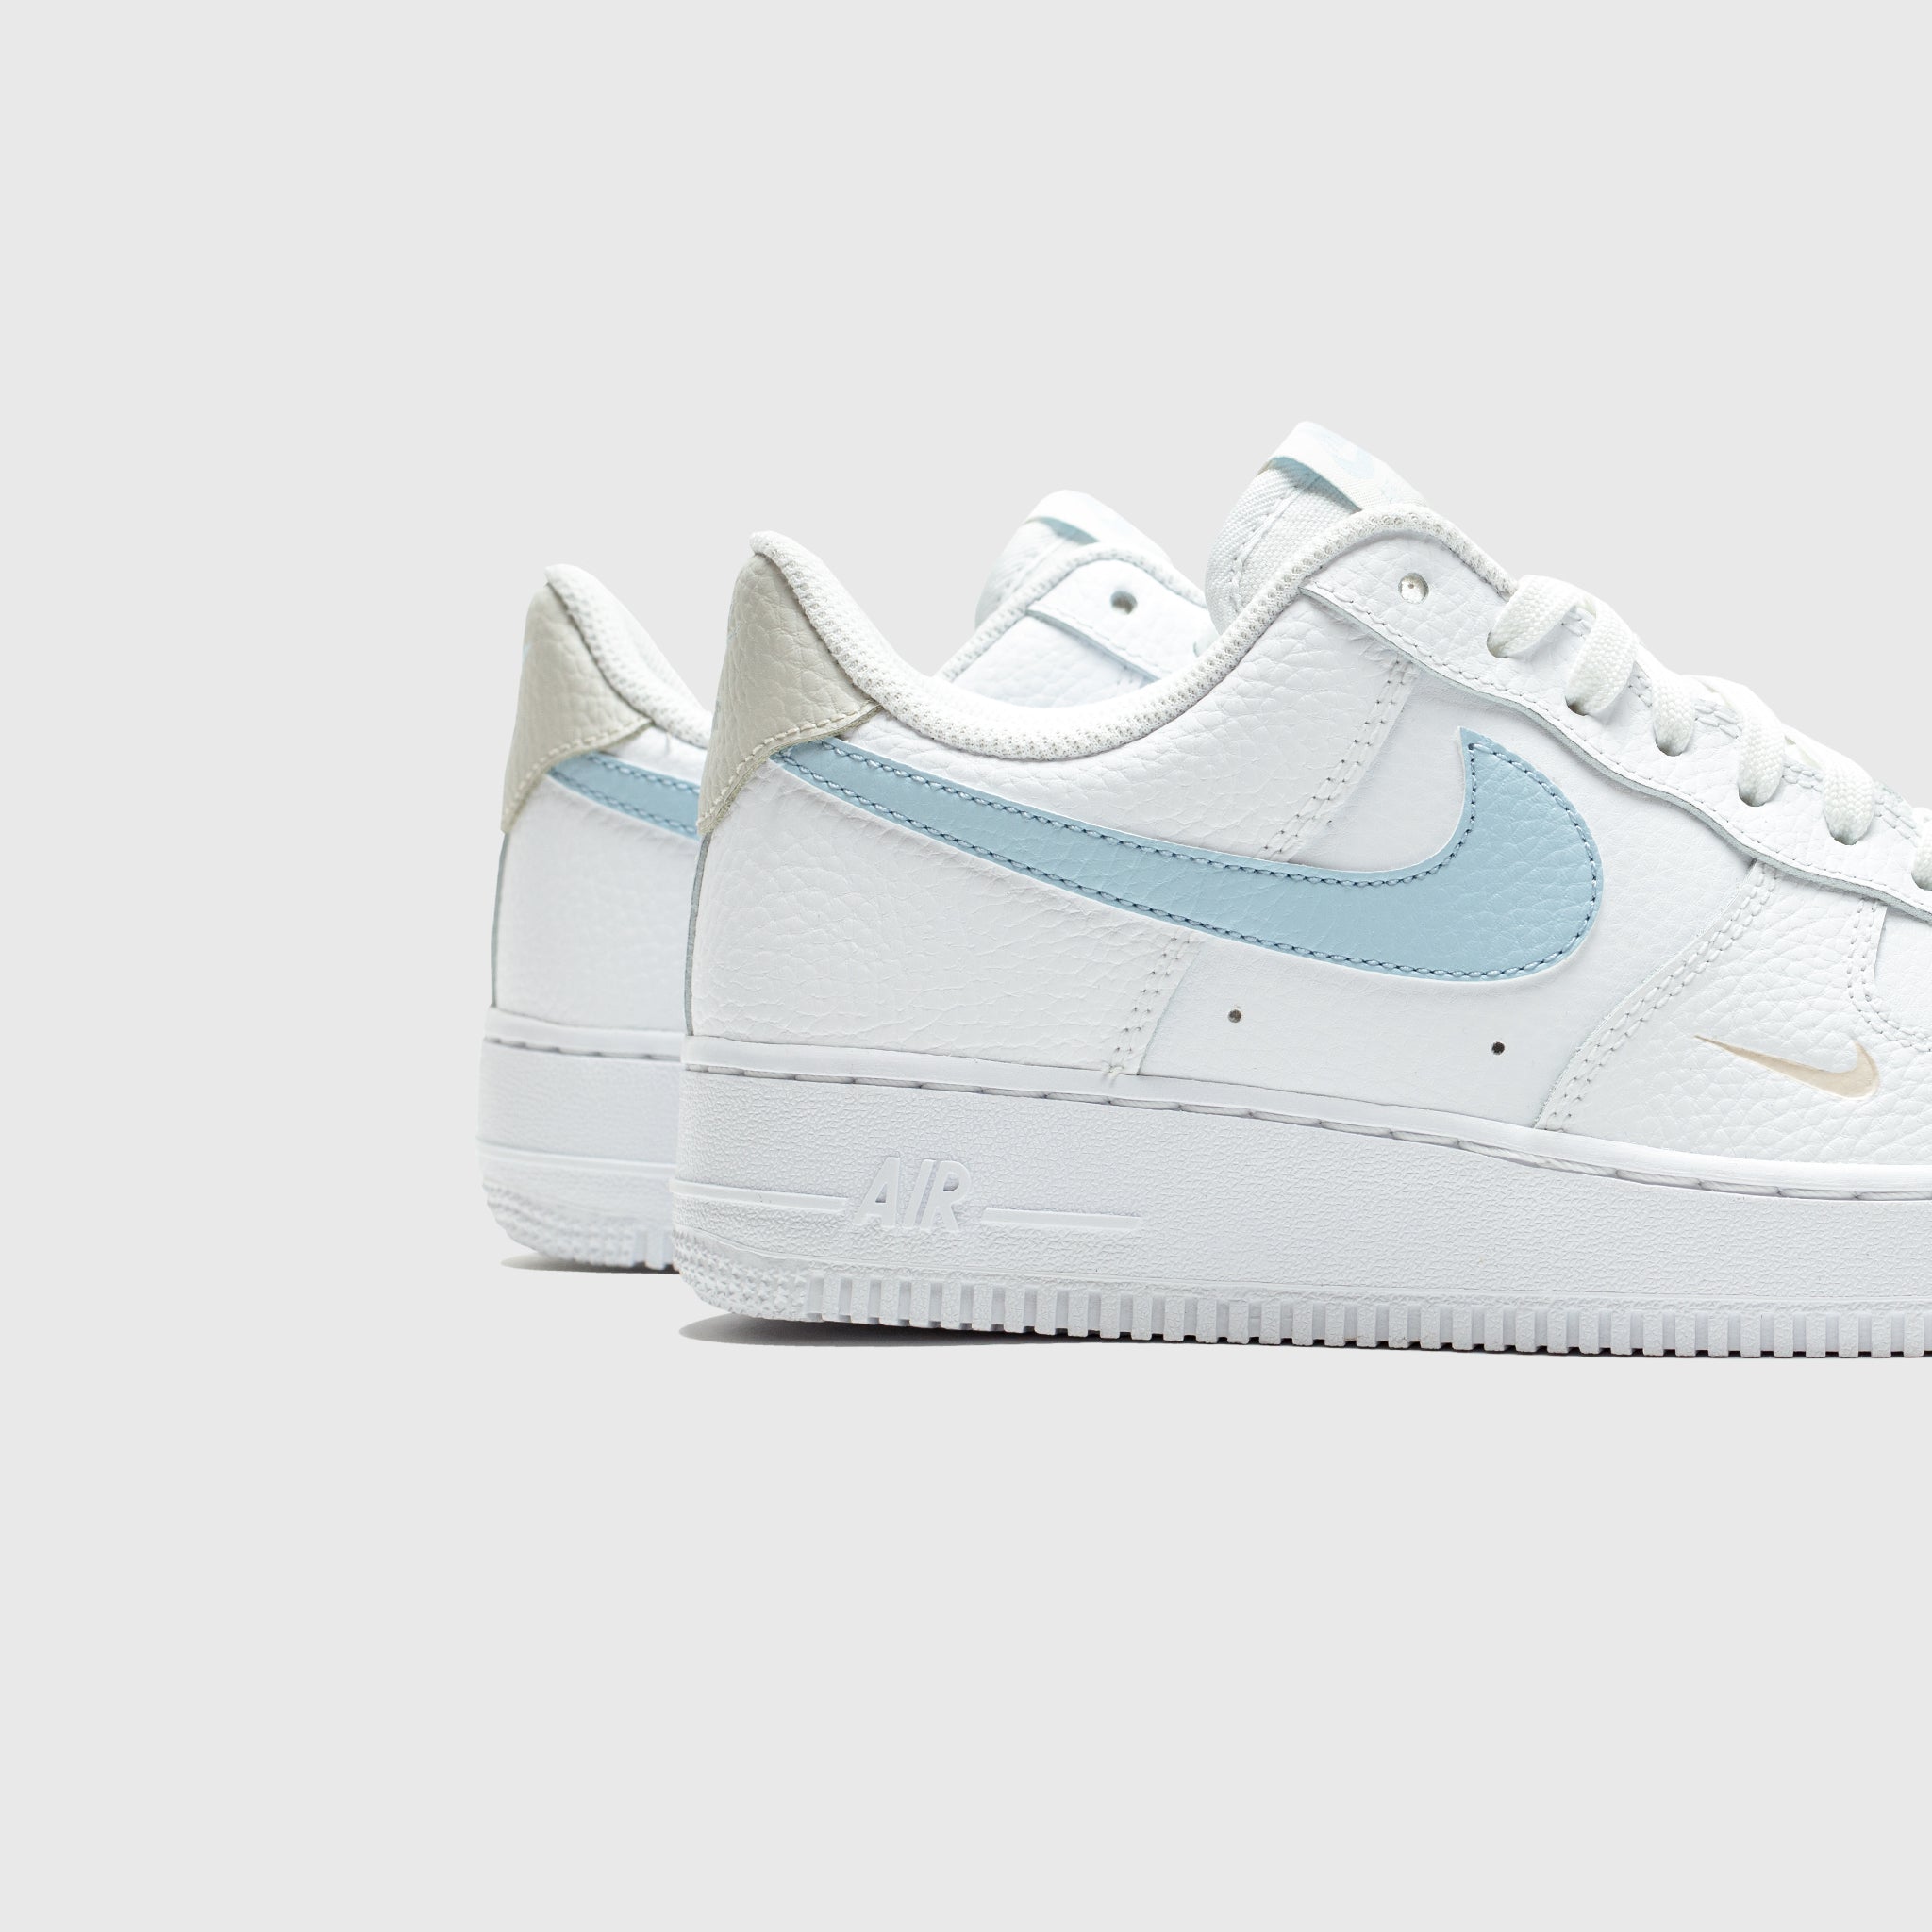 WMNS shoes AIR FORCE 1 '07 "ARMORY BLUE"